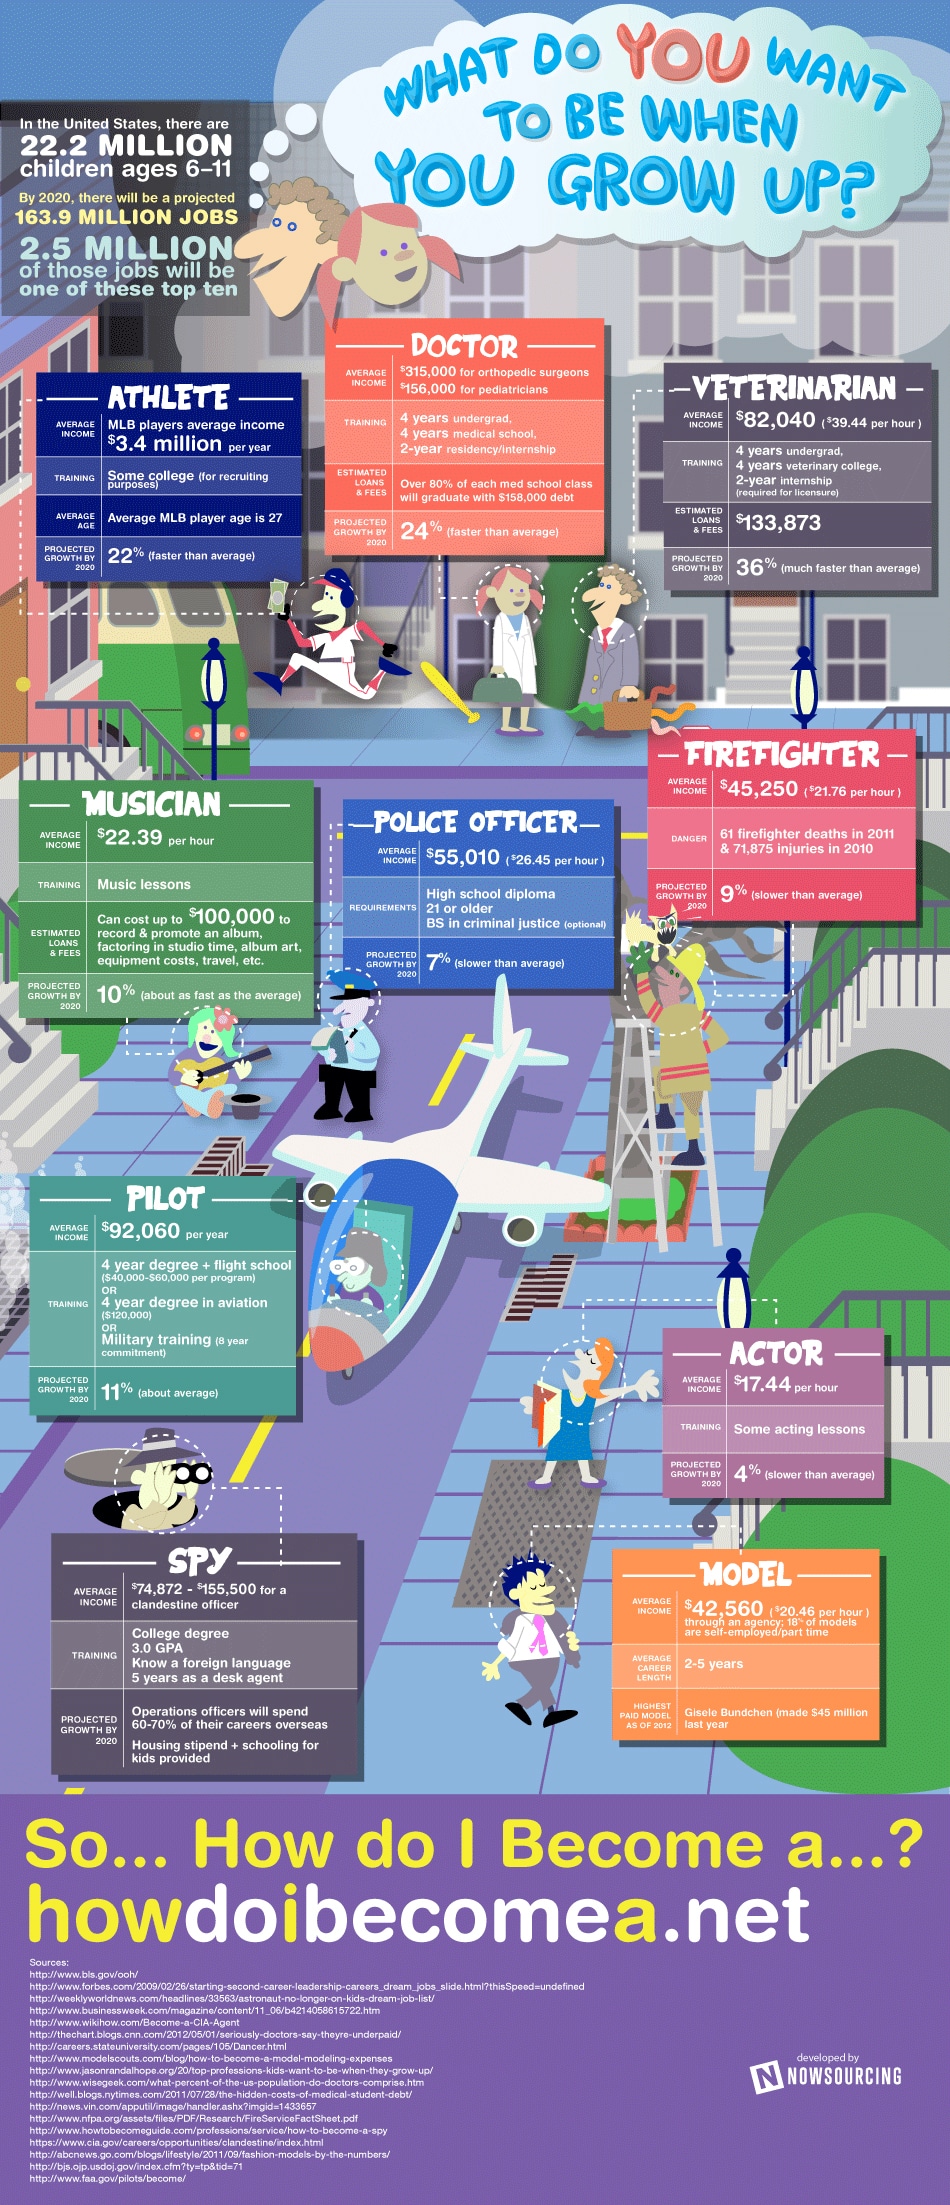 Career Choices: What Will You Be When You Grow Up? [Infographic]